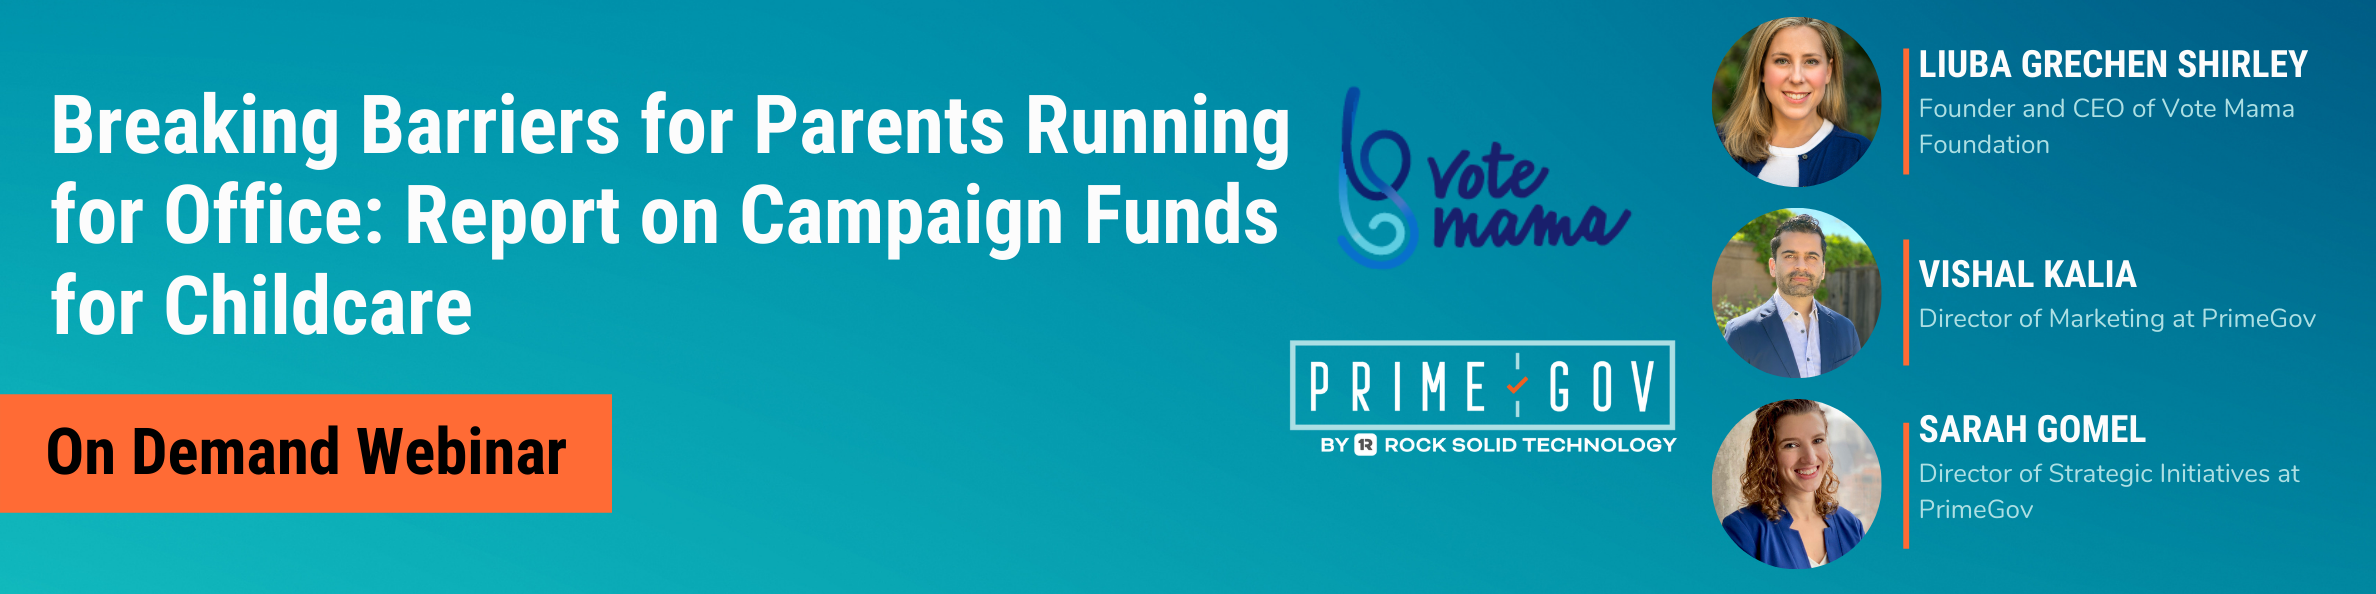 How the Vote Mama Foundation is Helping Parents Running for Office